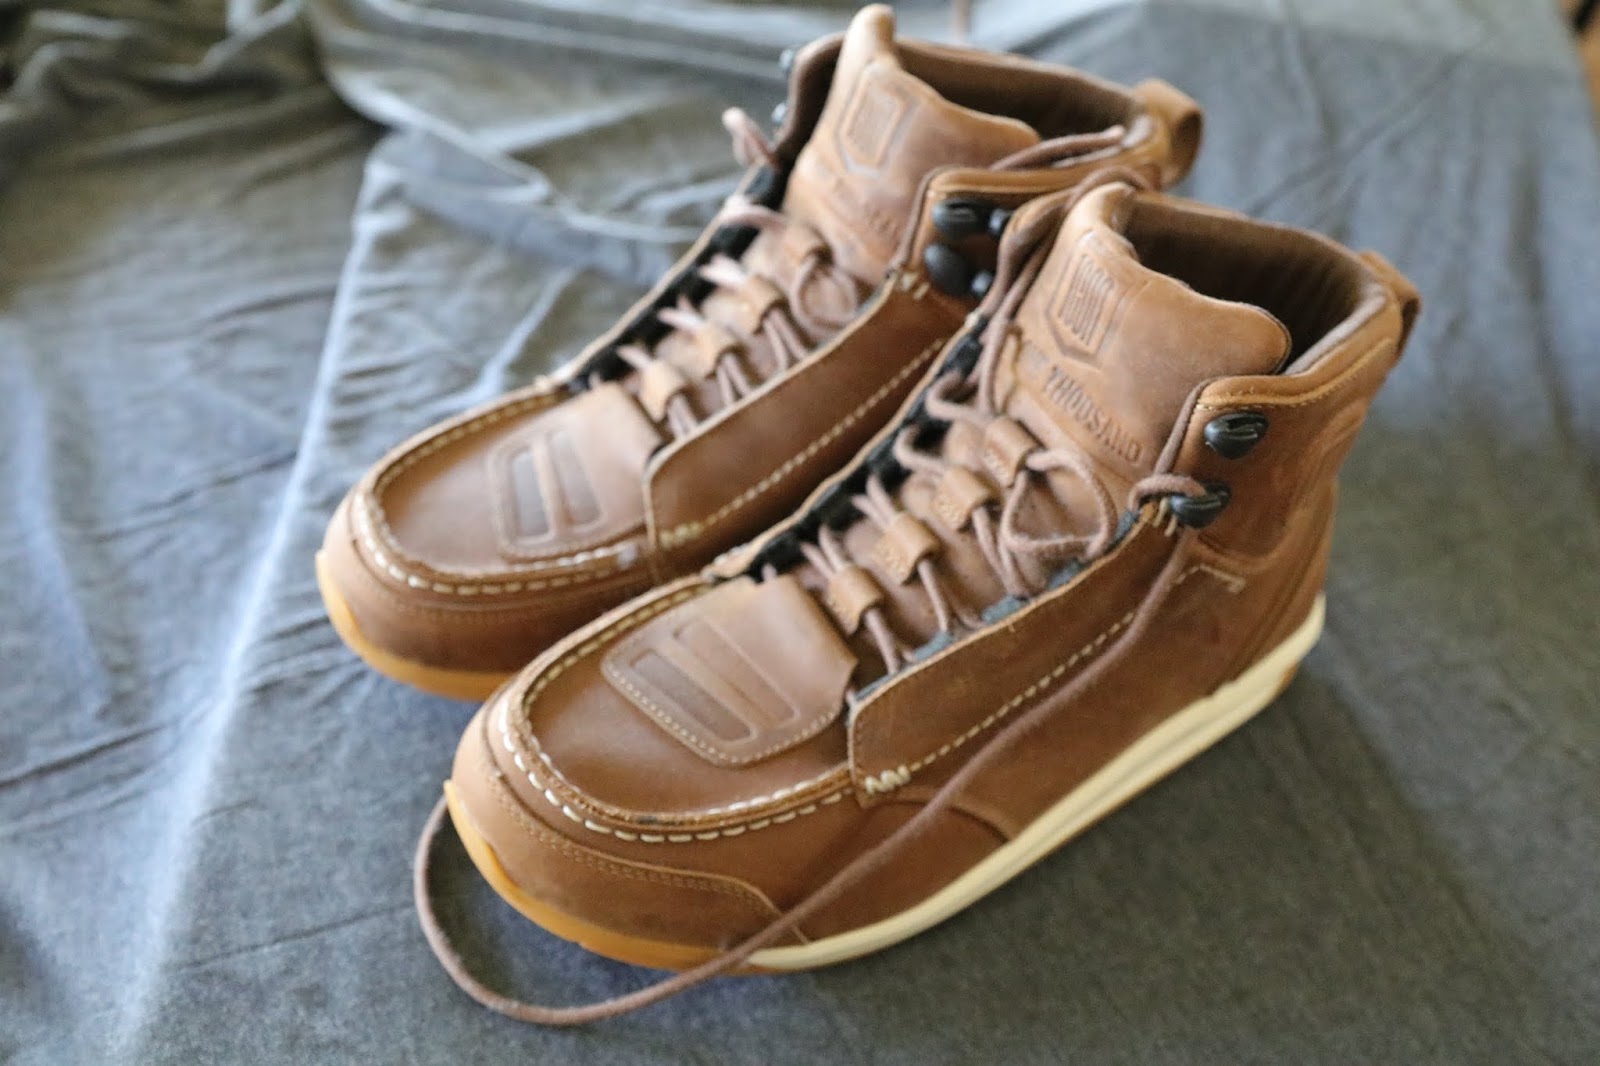 OldMotoDude: ICON 1000 Truant 2 Boots review (sort of)